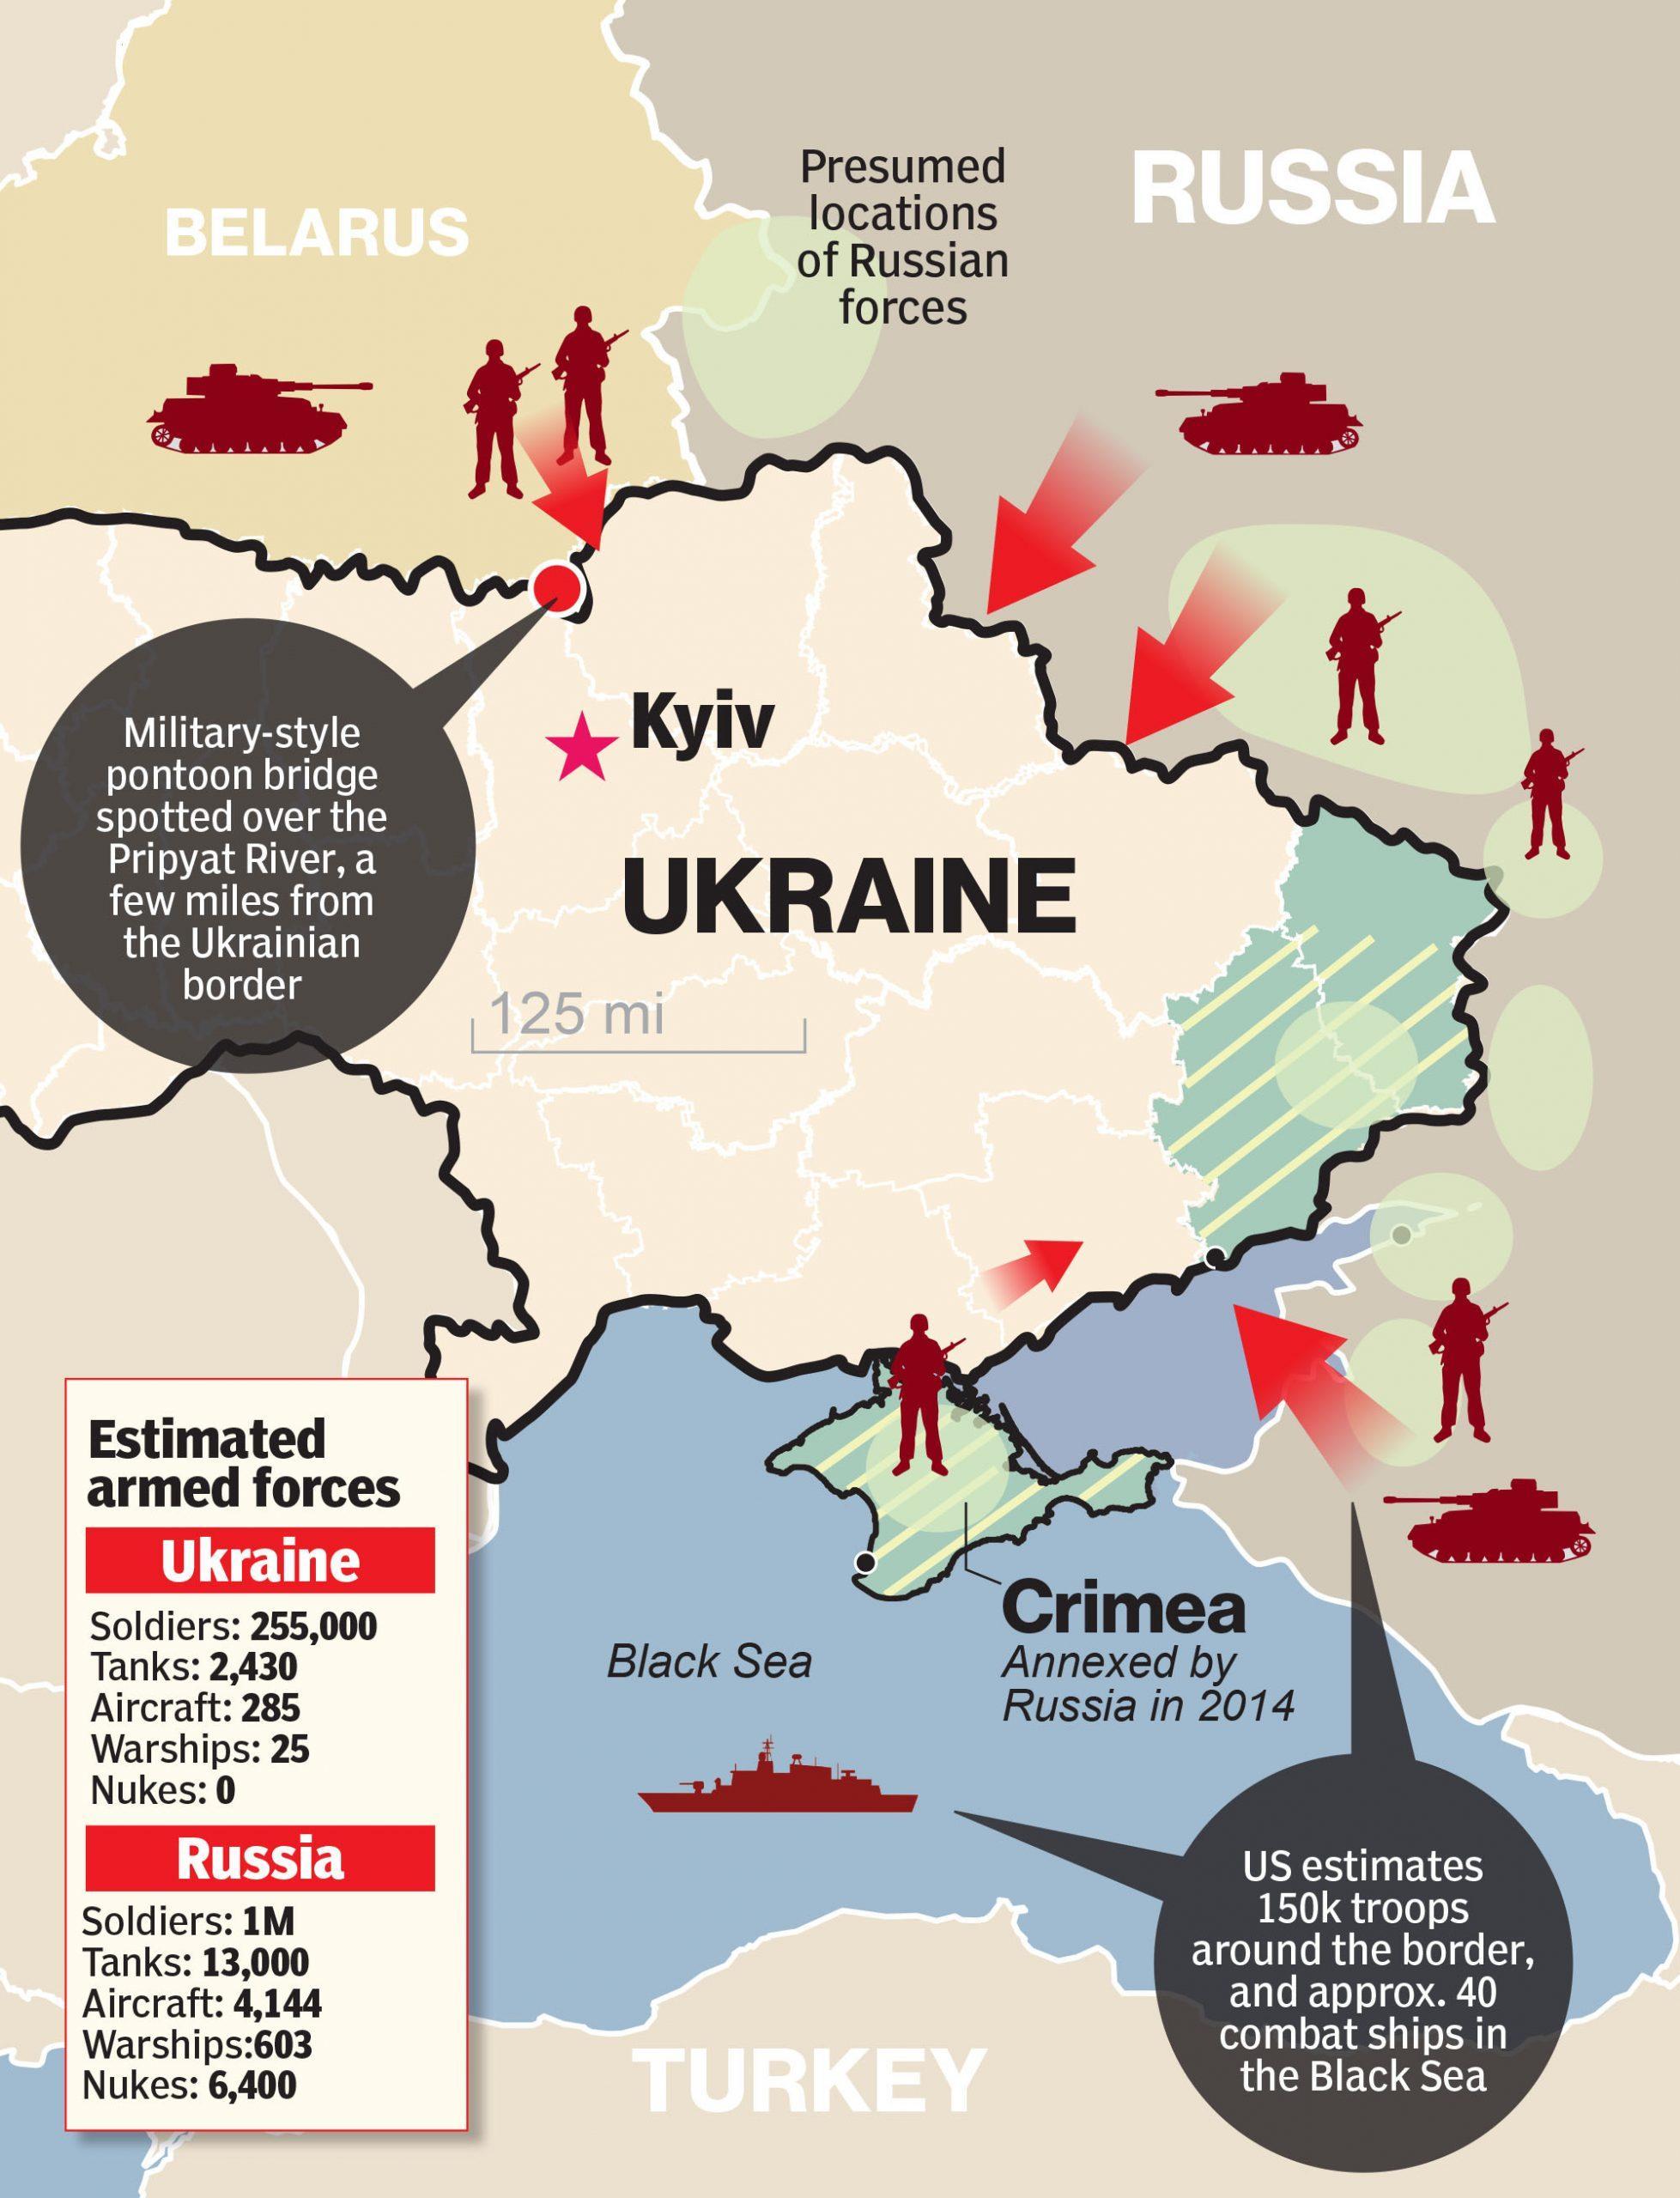 Ukraine And Russia Conflict Explained: Attack On Ukraine By Russia is potentially onset of war in Europe_50.1